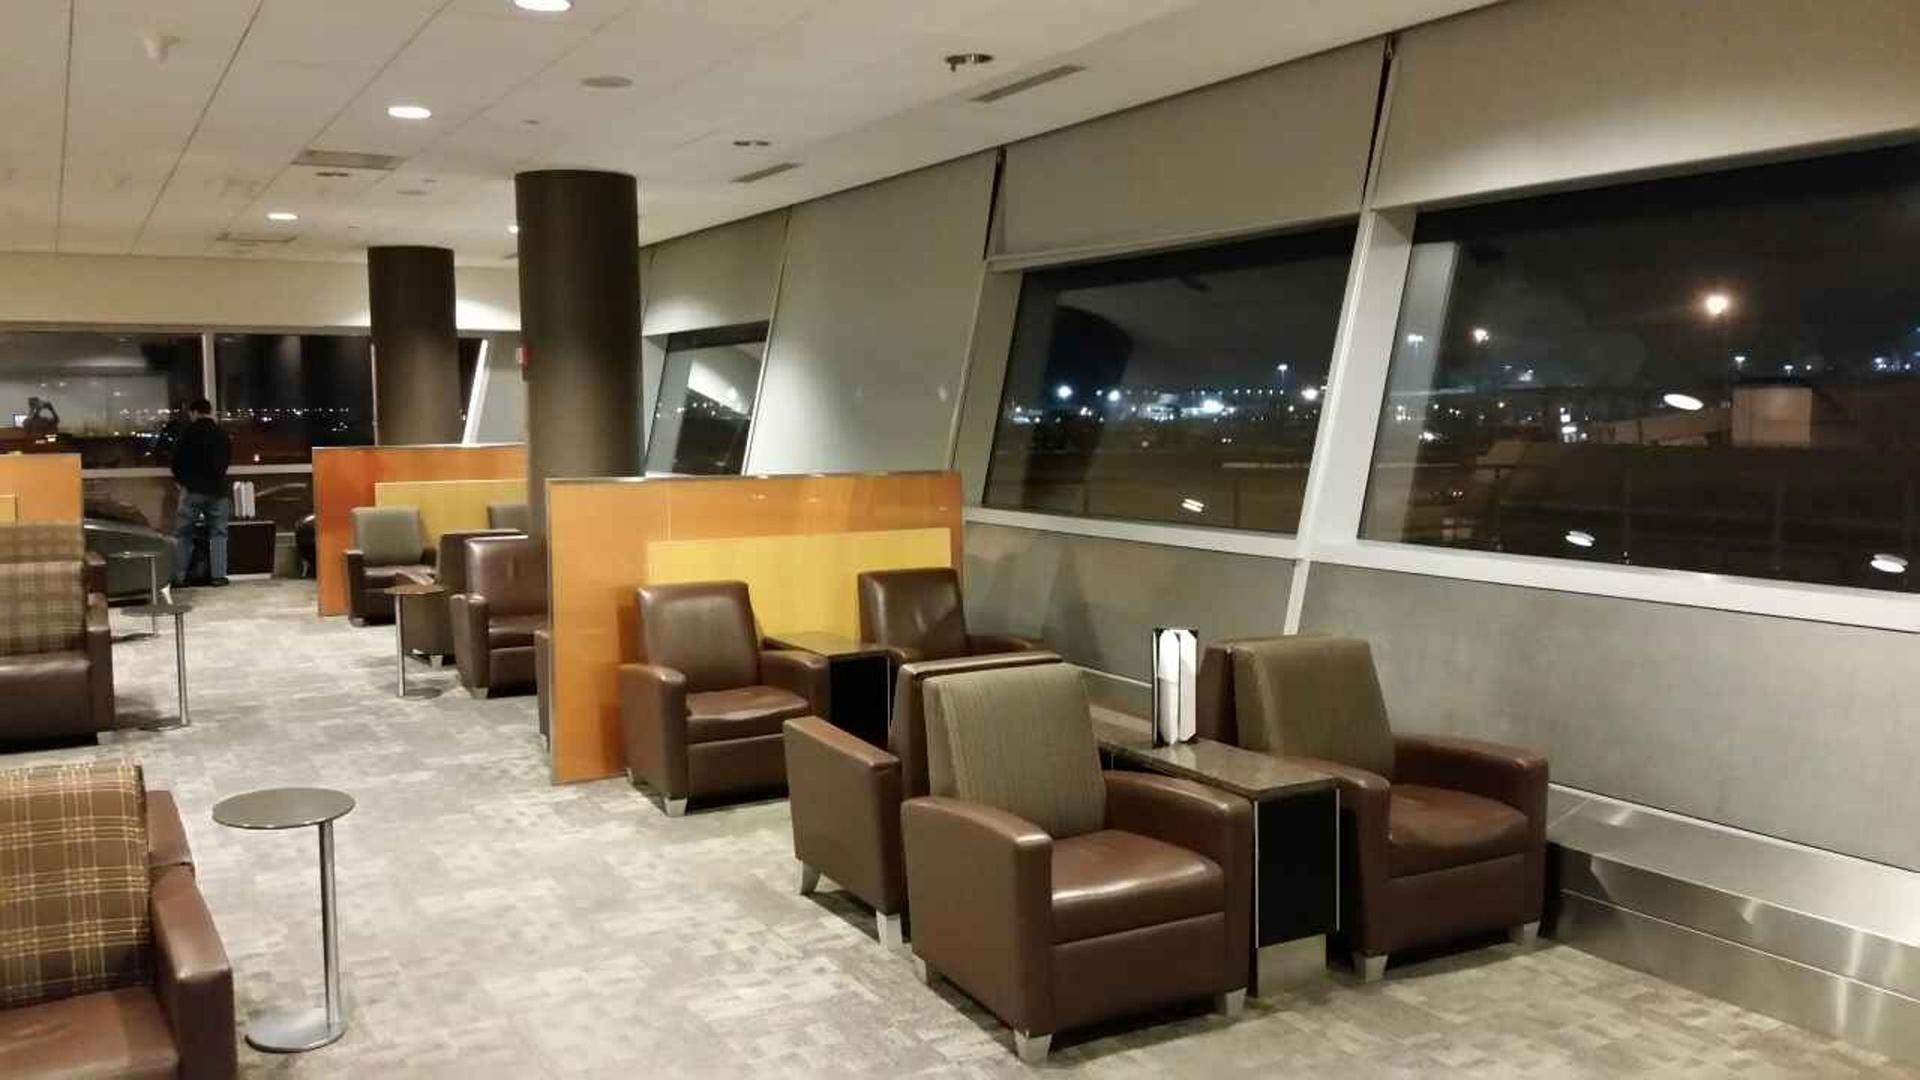 American Airlines Admirals Club image 14 of 25